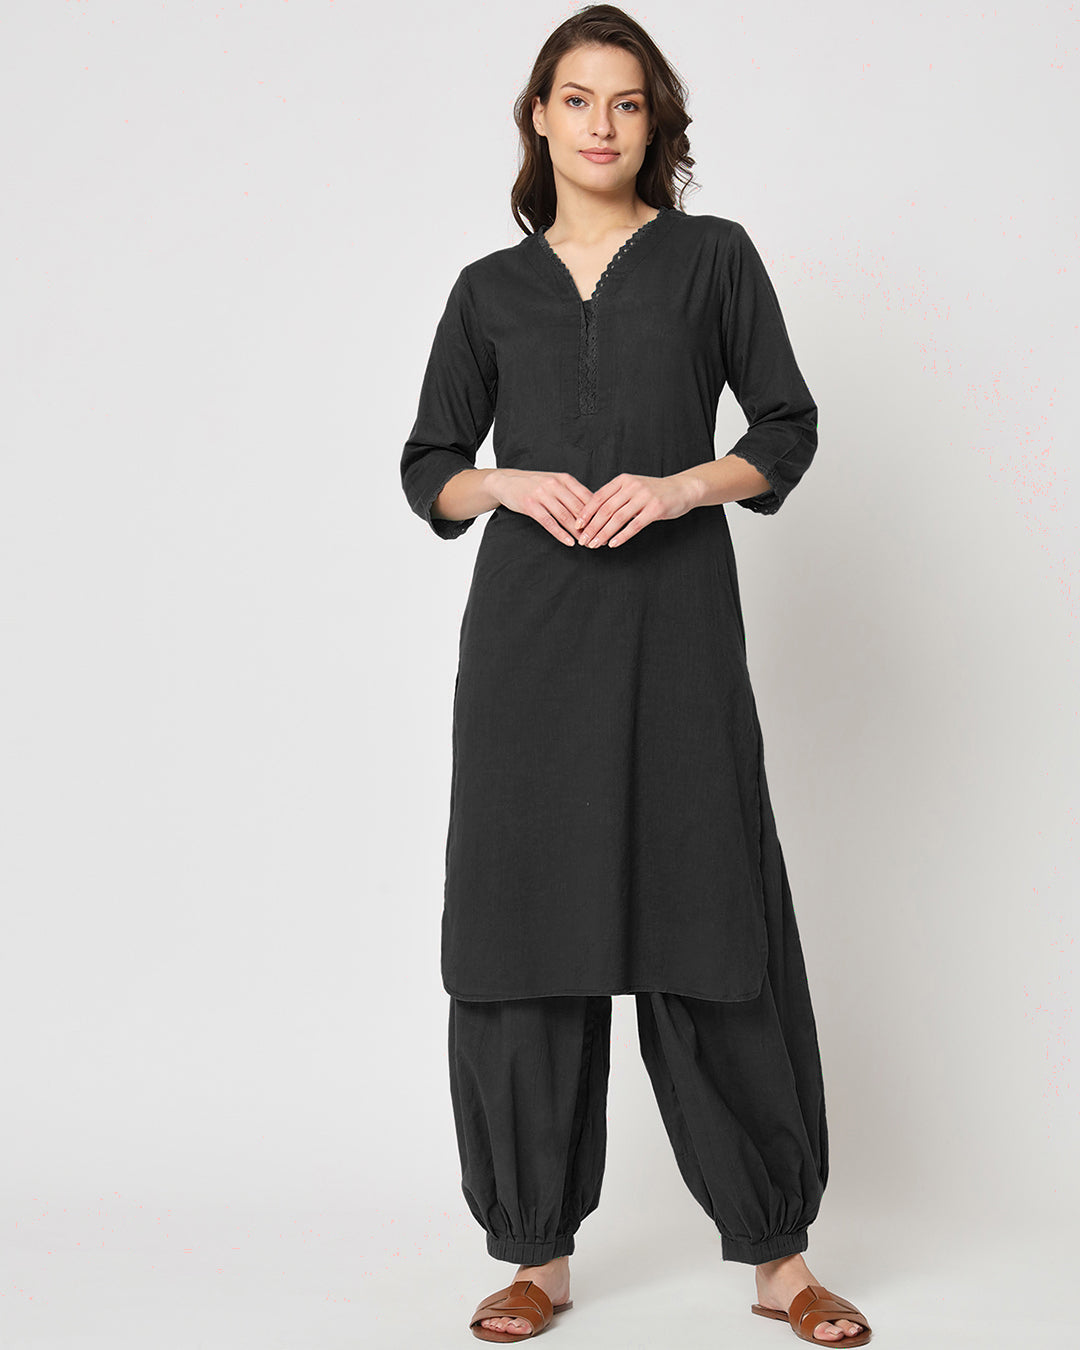 Classic Black Lace Affair Solid Kurta (Without Bottoms)